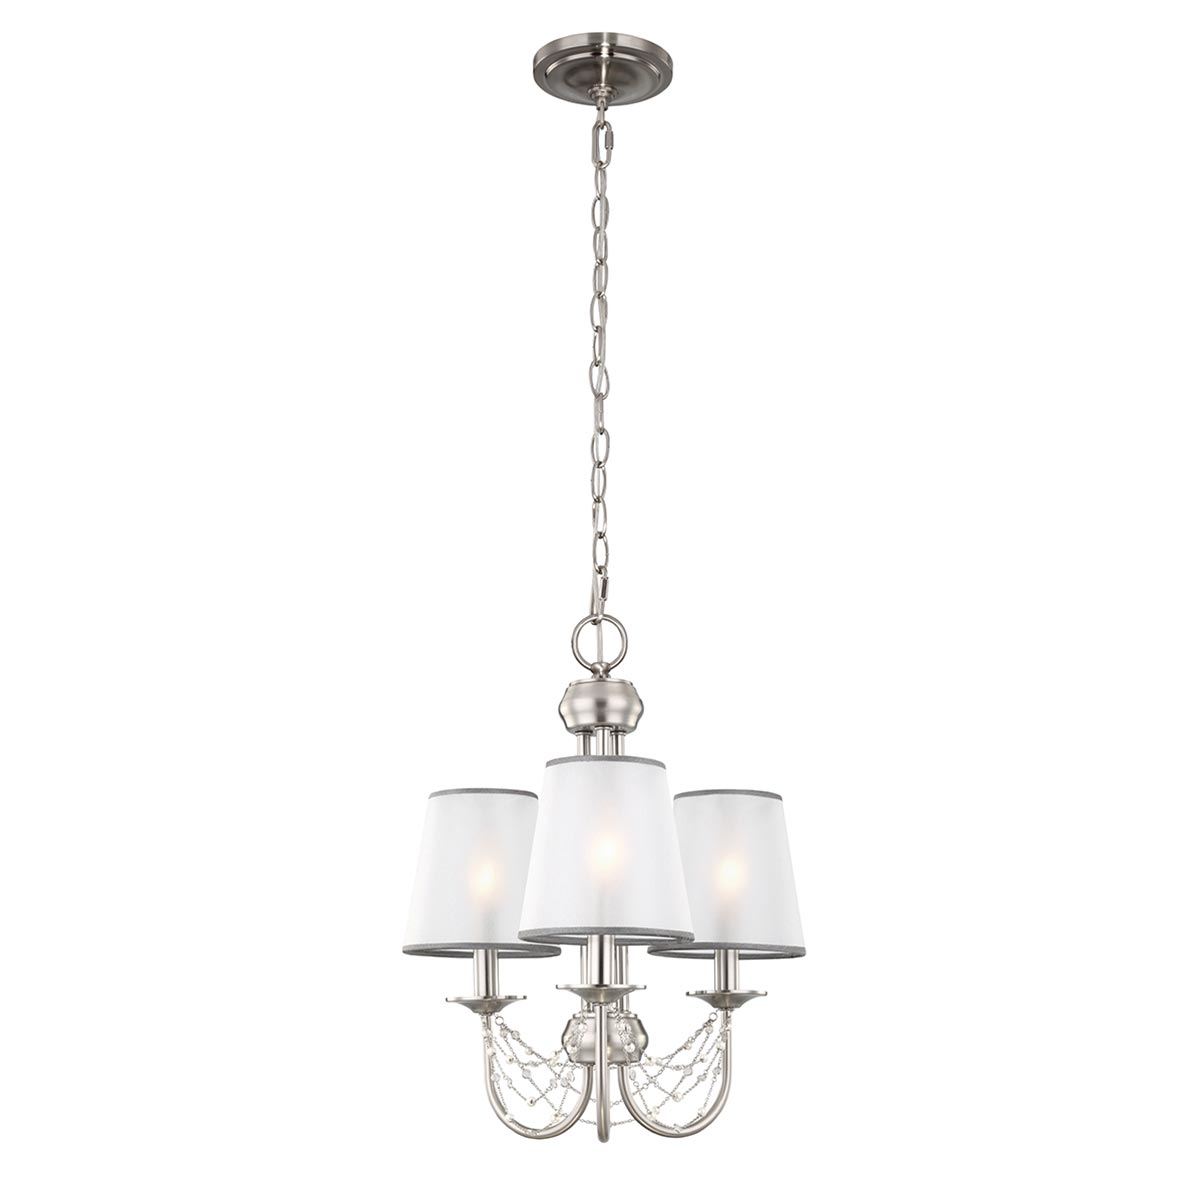 Feiss Aveline Brushed Steel 3 Light Chandelier With Organza Shades